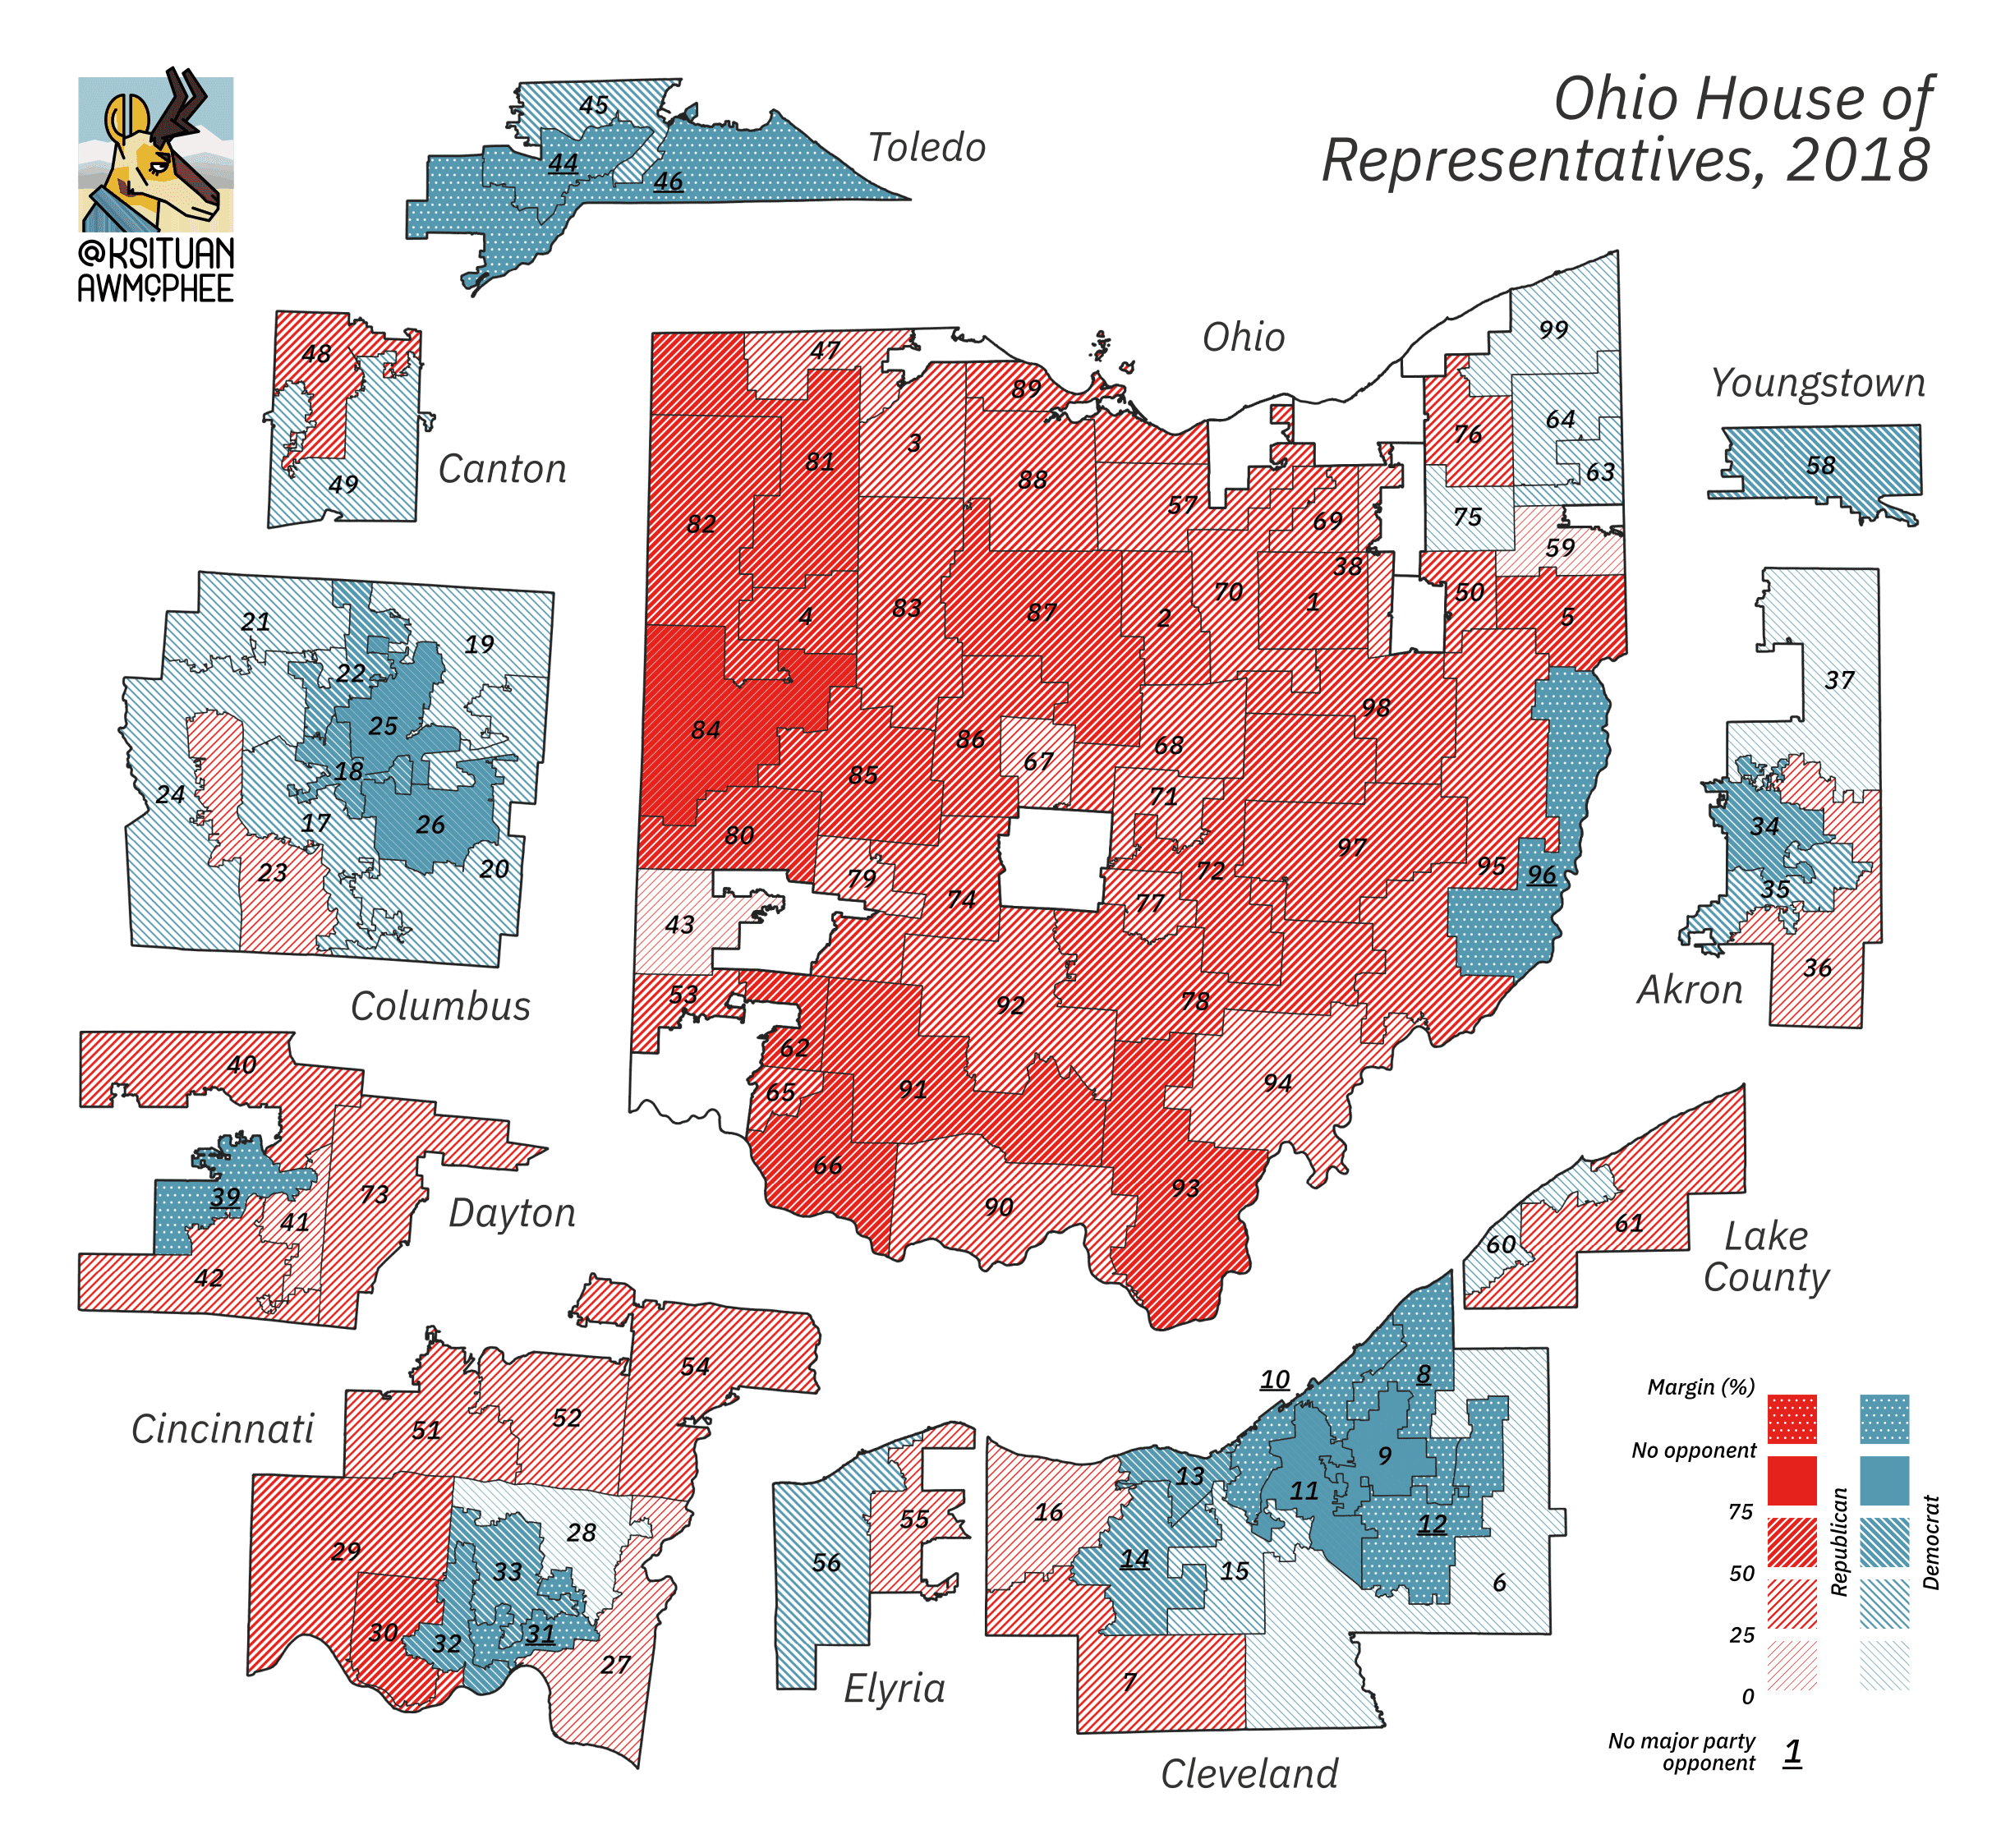 A political map of Ohio.